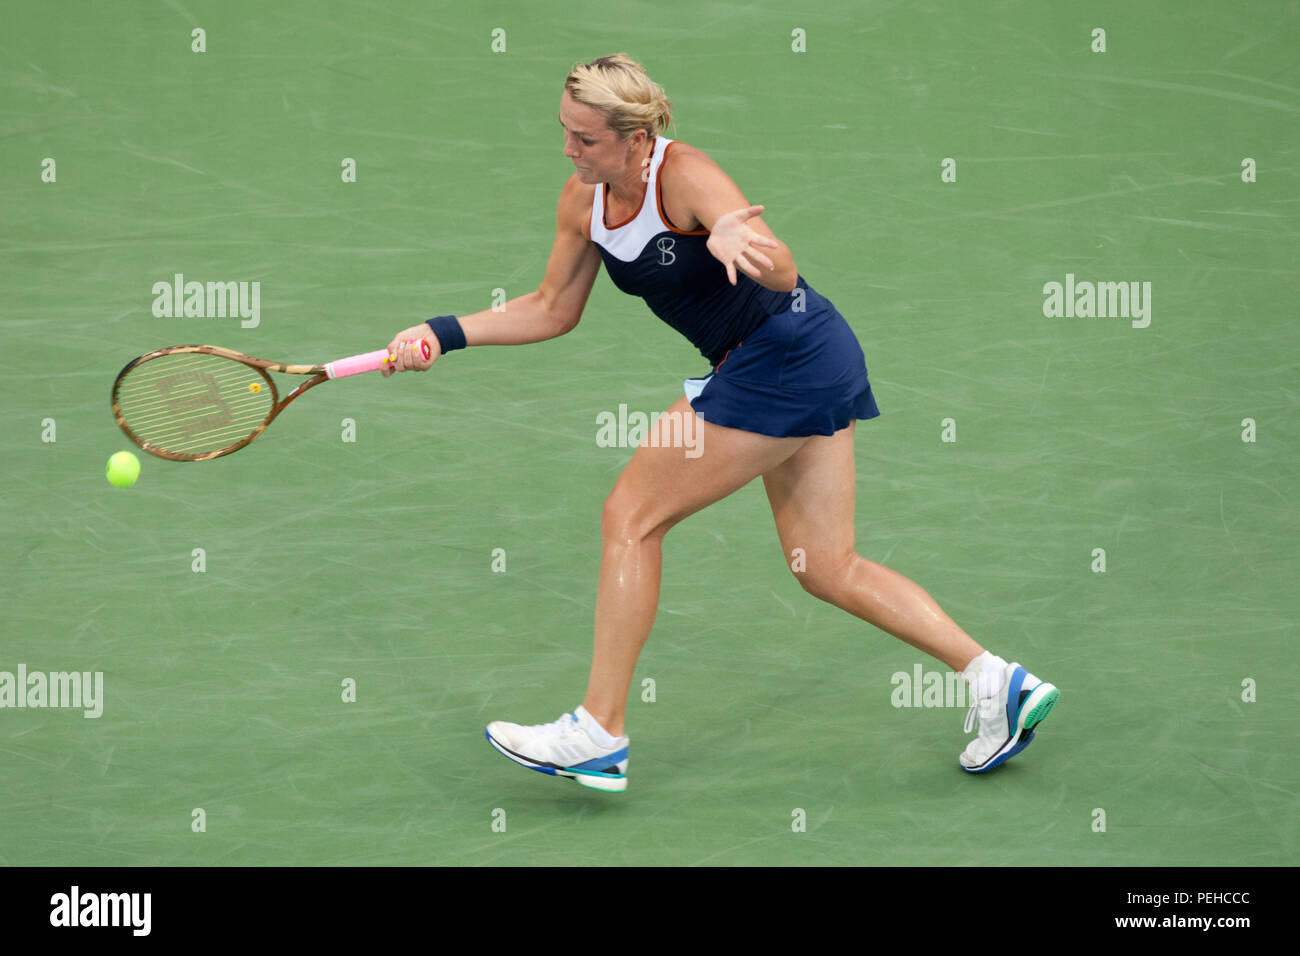 Cincinnati, OH, USA. 15th Aug, 2018. Western and Southern Open Tennis,  Cincinnati, OH - Cincinnati, Ohio, USA. 15th Aug, 2018. Anastasia  Pavlyuchenkova in action against Angelique Kerber in the Western and  Southern